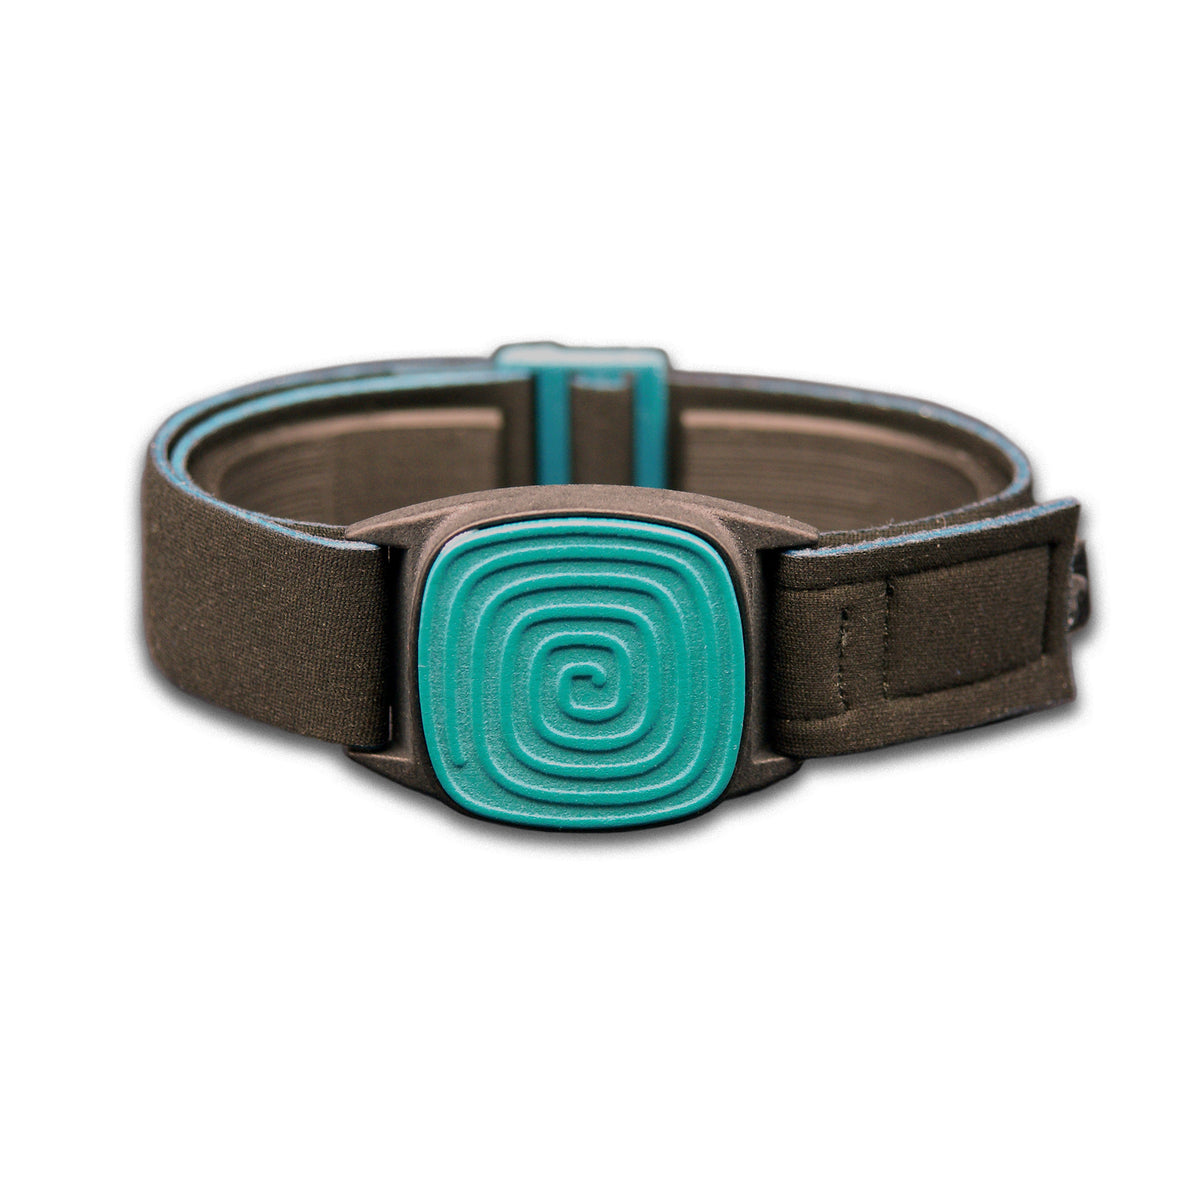 Libreband+ armband for Blucon. Teal cover with Swirl design. 